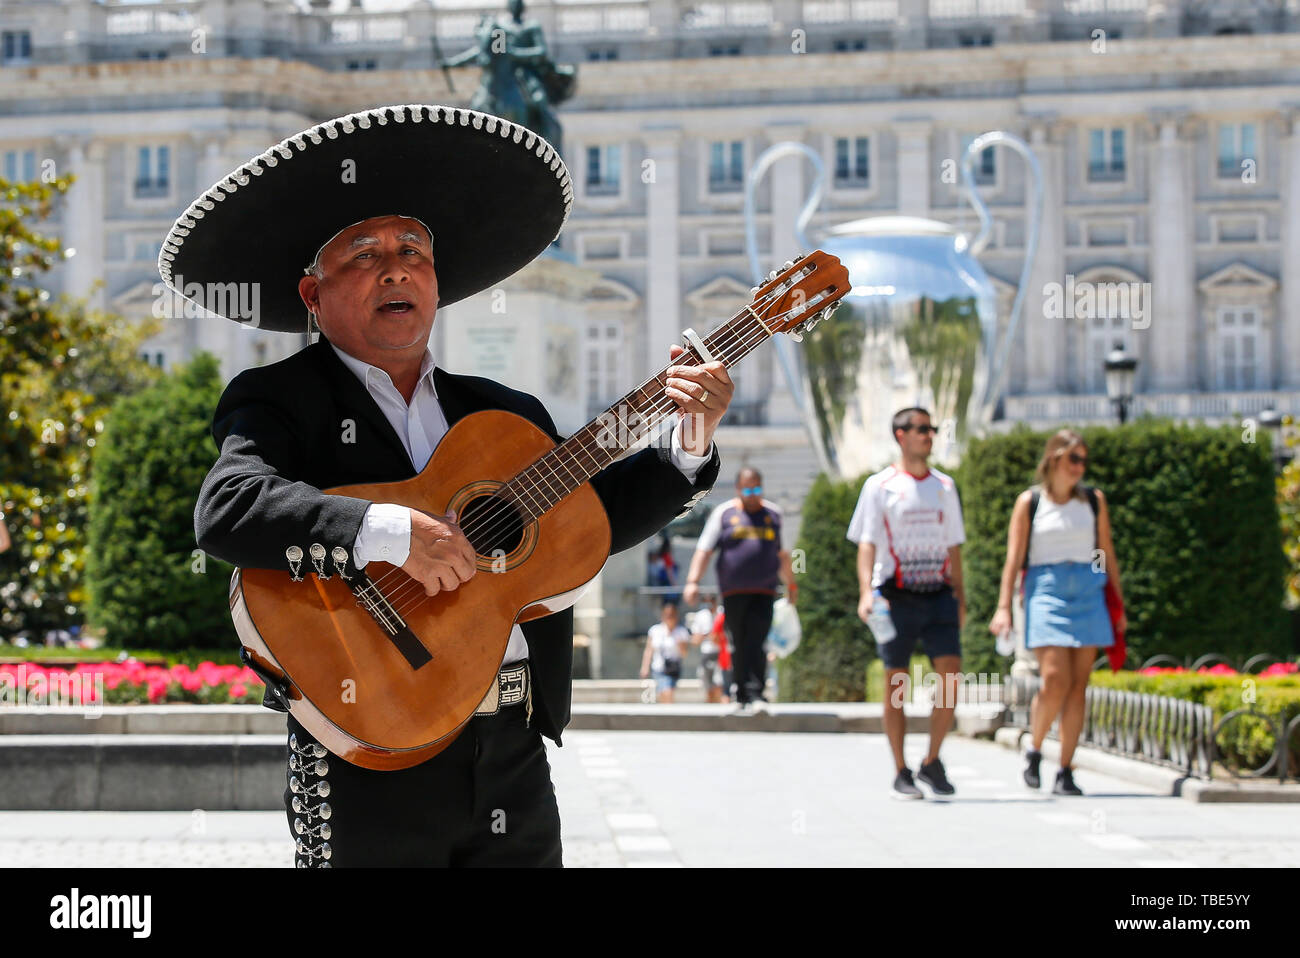 Madrid, Spain. 01st June, 2019. A man plays the Spanish Guitar in front of  the giant Champions League trophy at the Royal Palace prior to the UEFA  Champions League Final match between